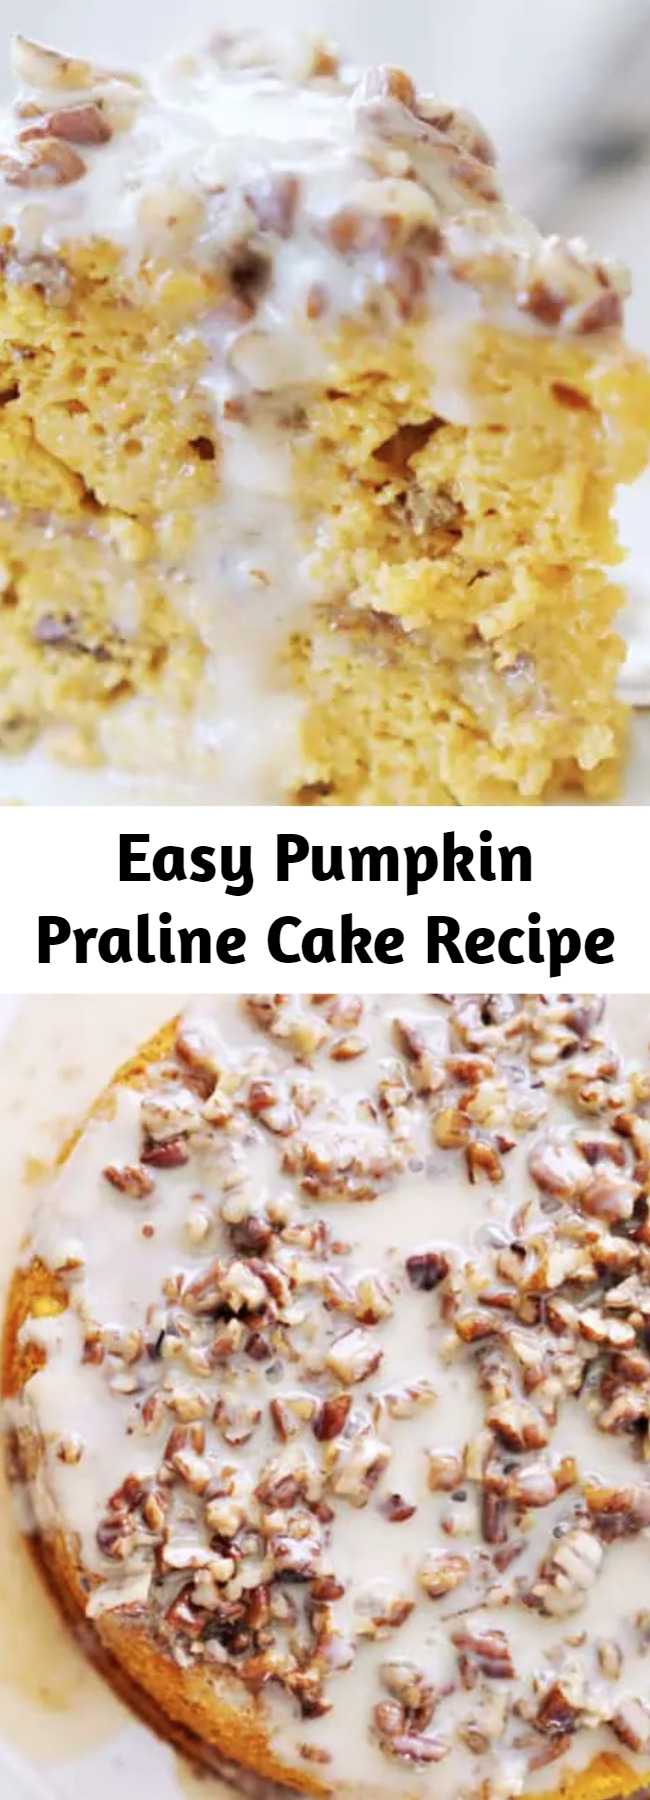 Easy Pumpkin Praline Cake Recipe - The most indulgent icing on the planet poured over a heavenly, moist, decadent and flavor packed Pumpkin Praline Cake. The EASIEST pumpkin cake recipe EVER!